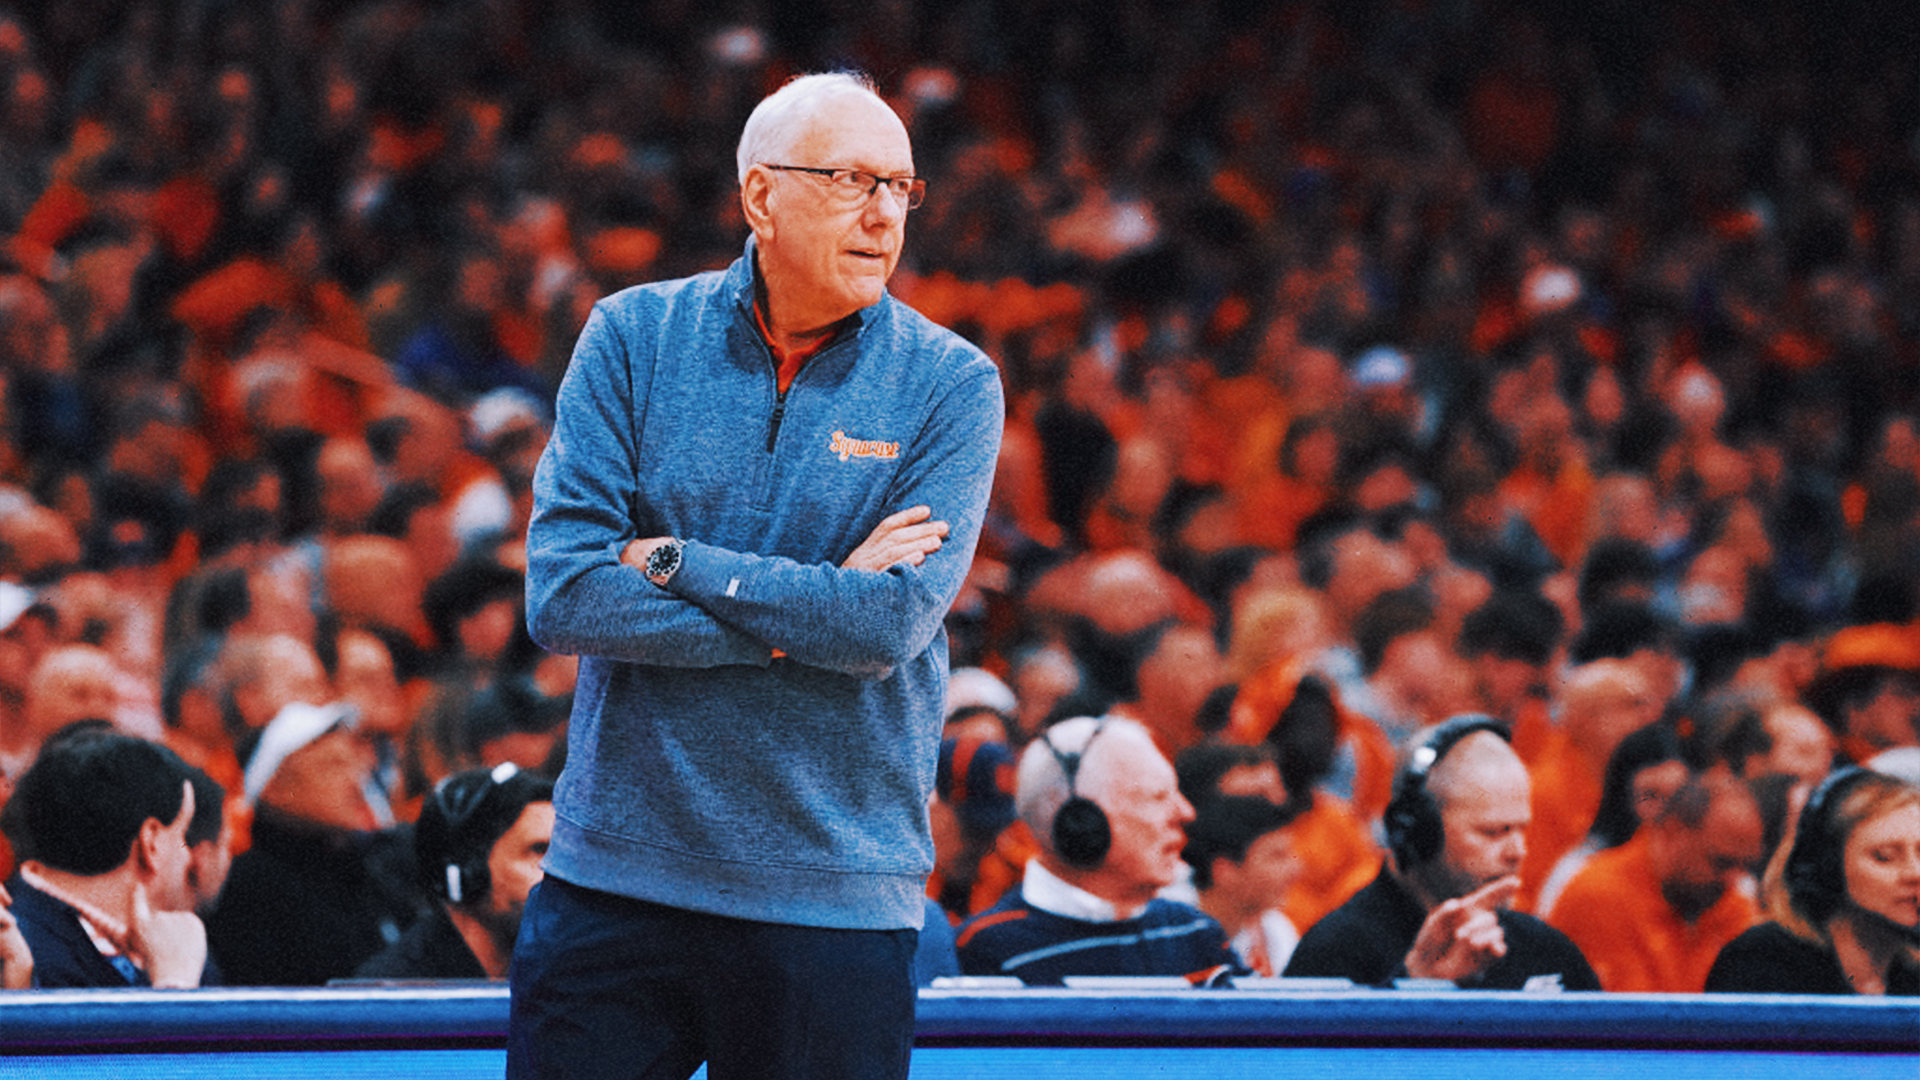 Former Syracuse coach Jim Boeheim is staying close to the game in retirement